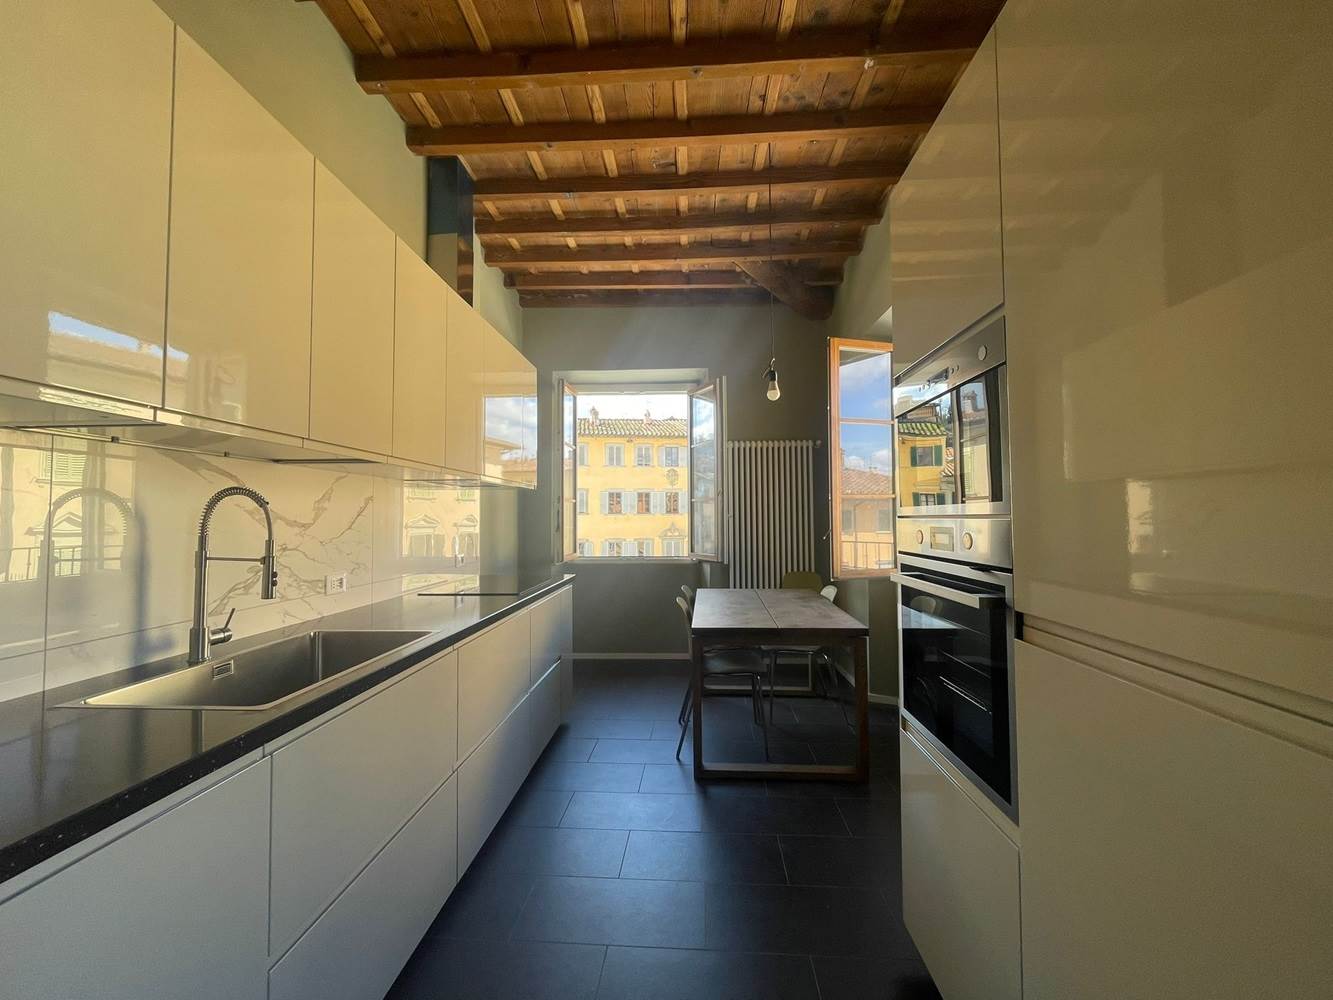 CENTRO FIGLINE, FIGLINE E INCISA VALDARNO, Apartment for sale of 88 Sq. mt., Excellent Condition, Heating Individual heating system, Energetic class: 